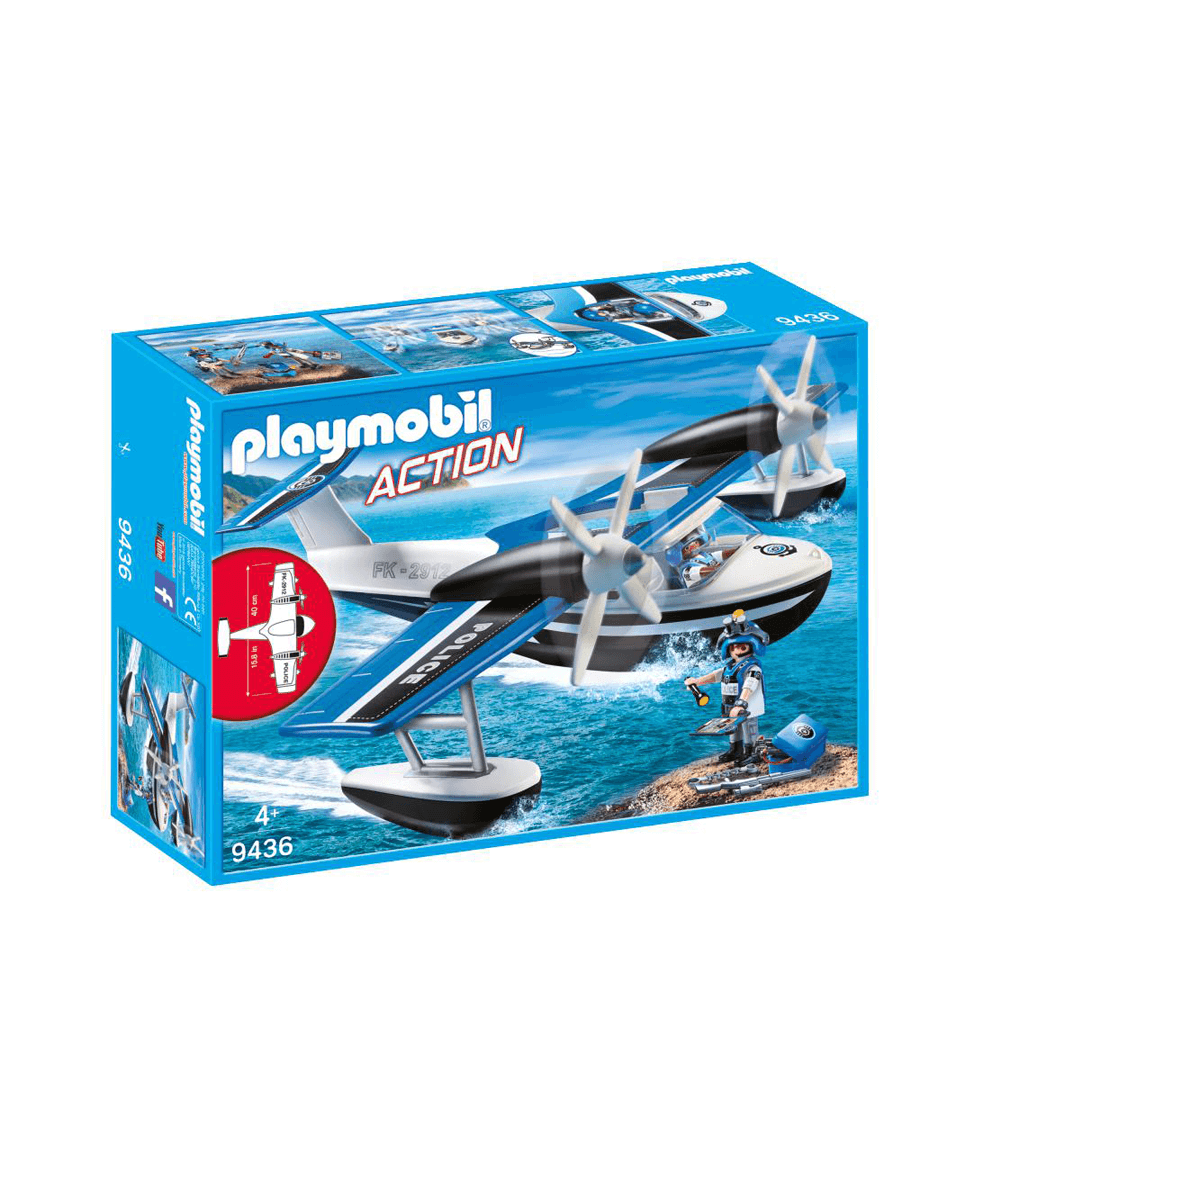 9436 PLAYMOBIL Action Floating Police Seaplane for sale online 